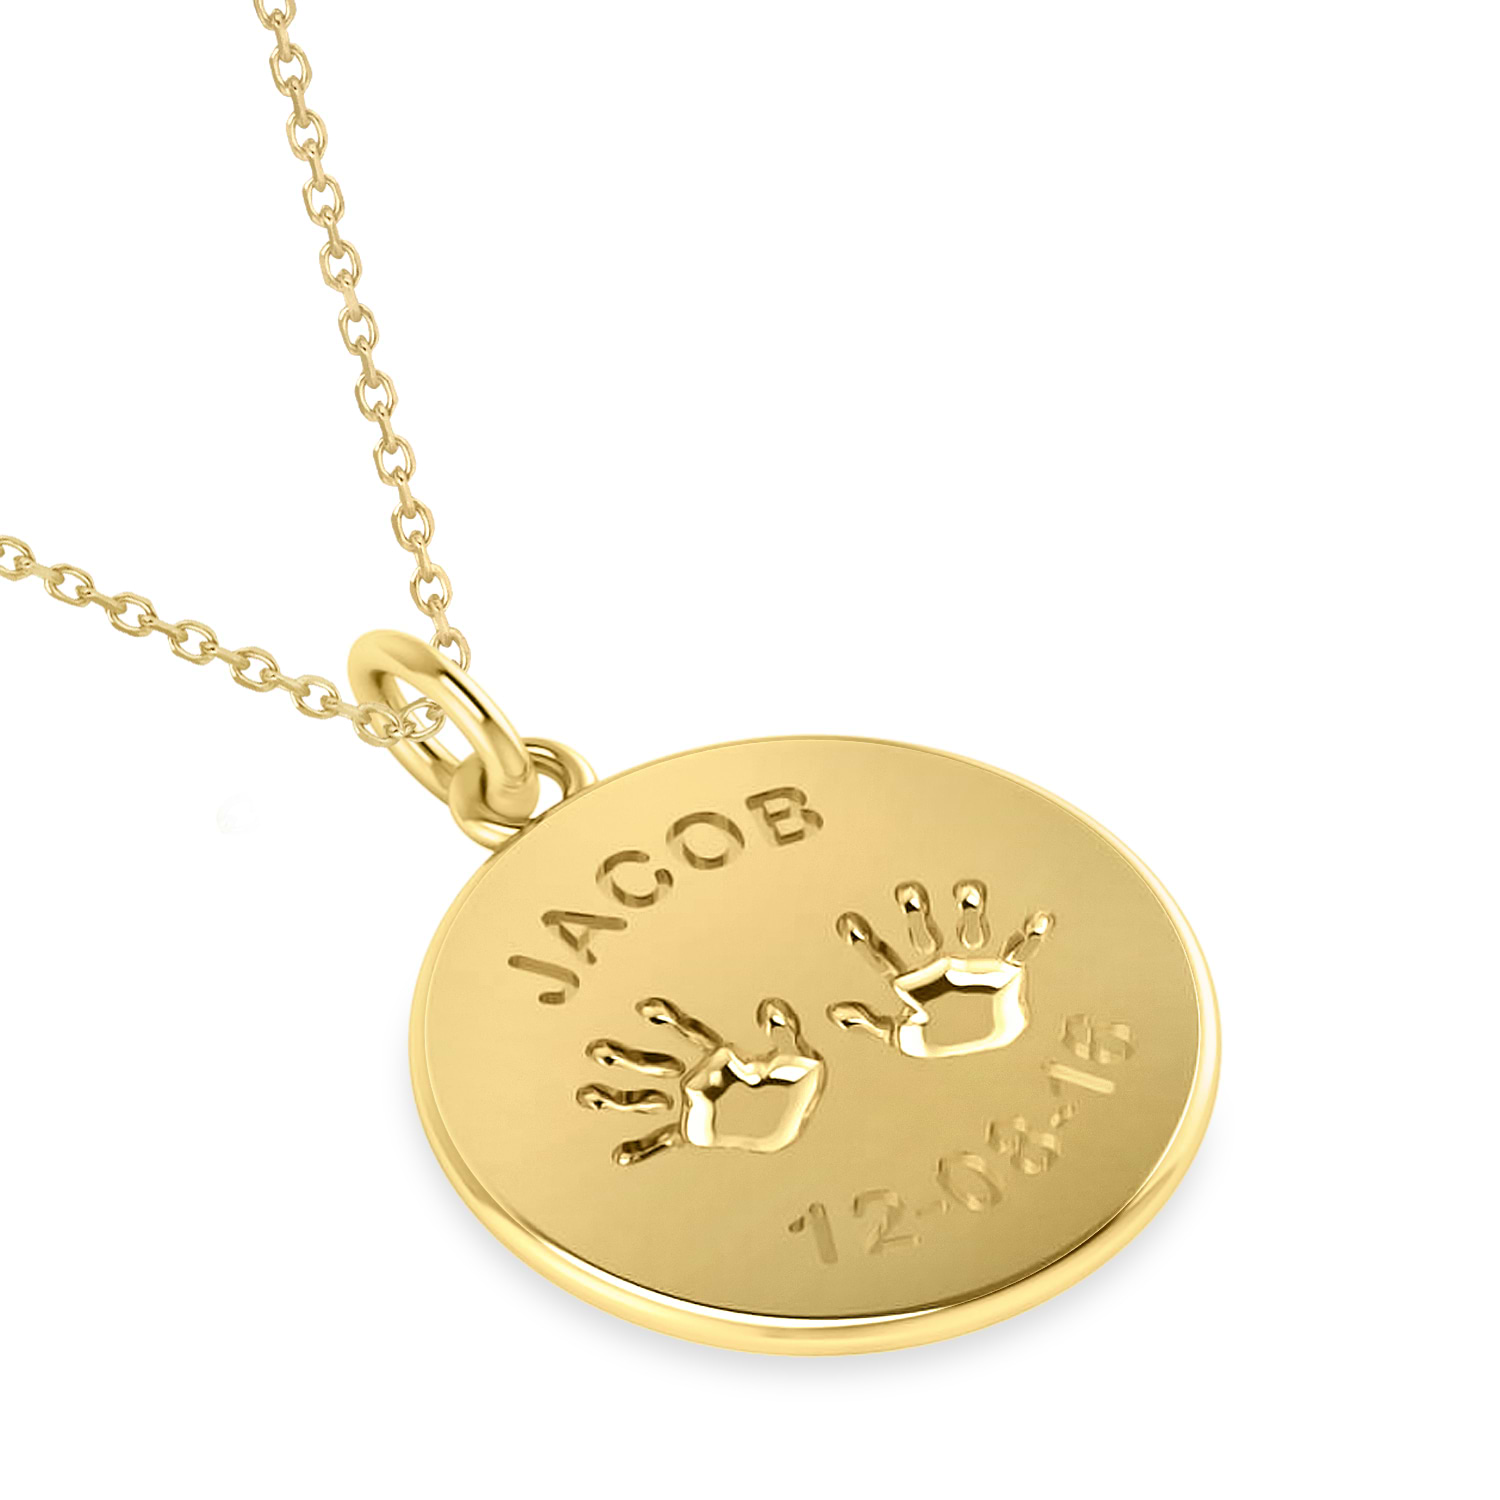 Personalized Baby Name Charm Pendant Necklace 14k Yellow Gold